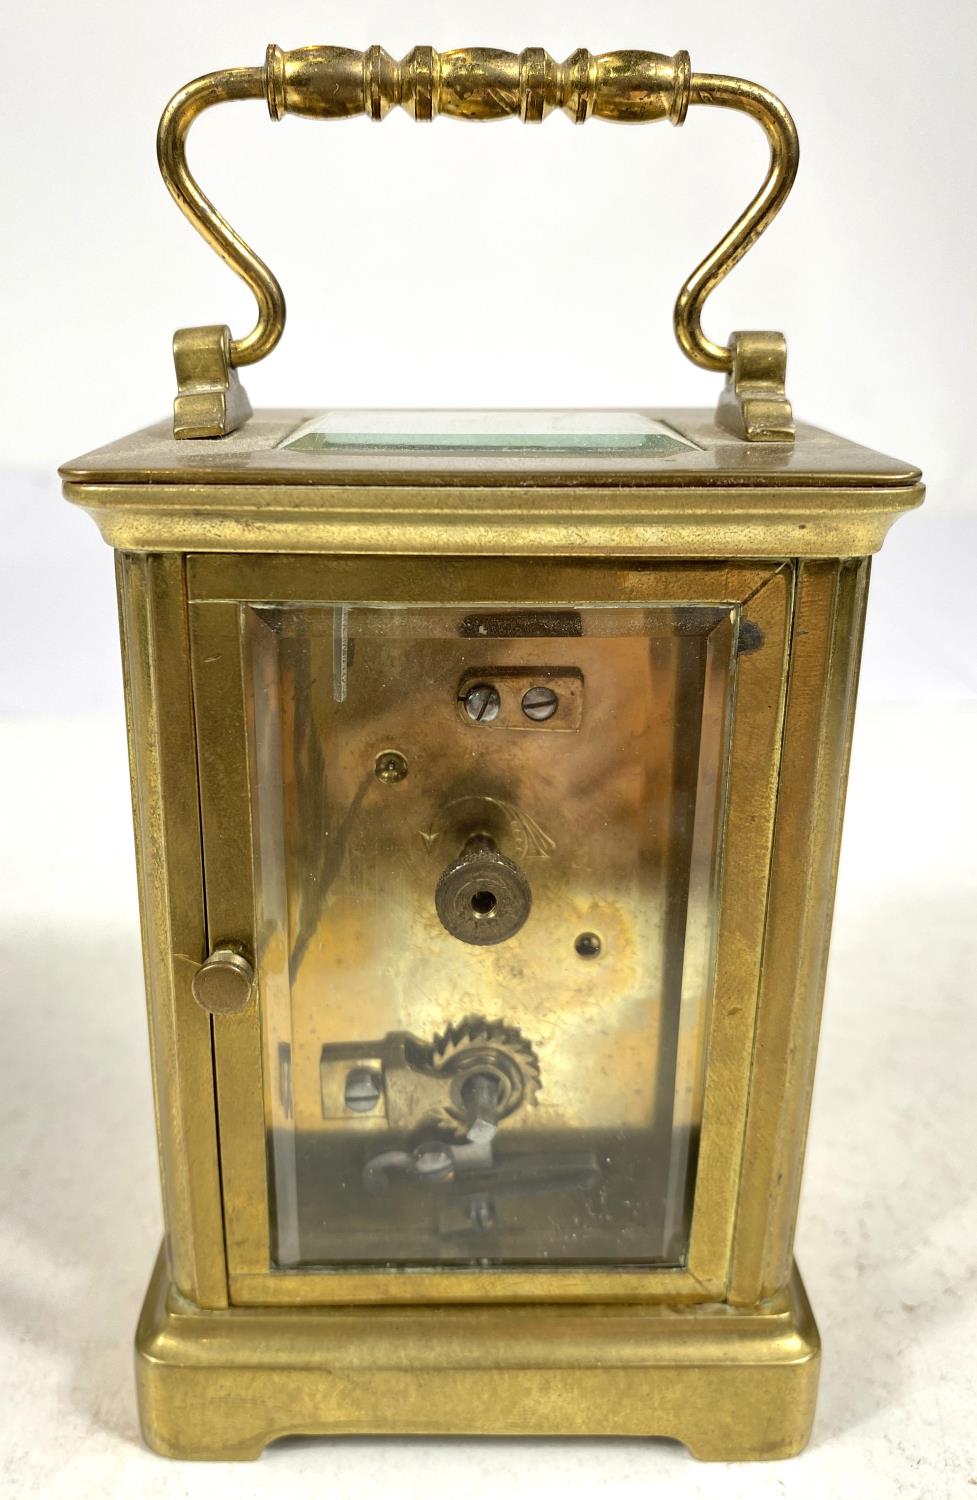 A 19th century French carriage clock with white dial and timepiece movement - Image 4 of 7